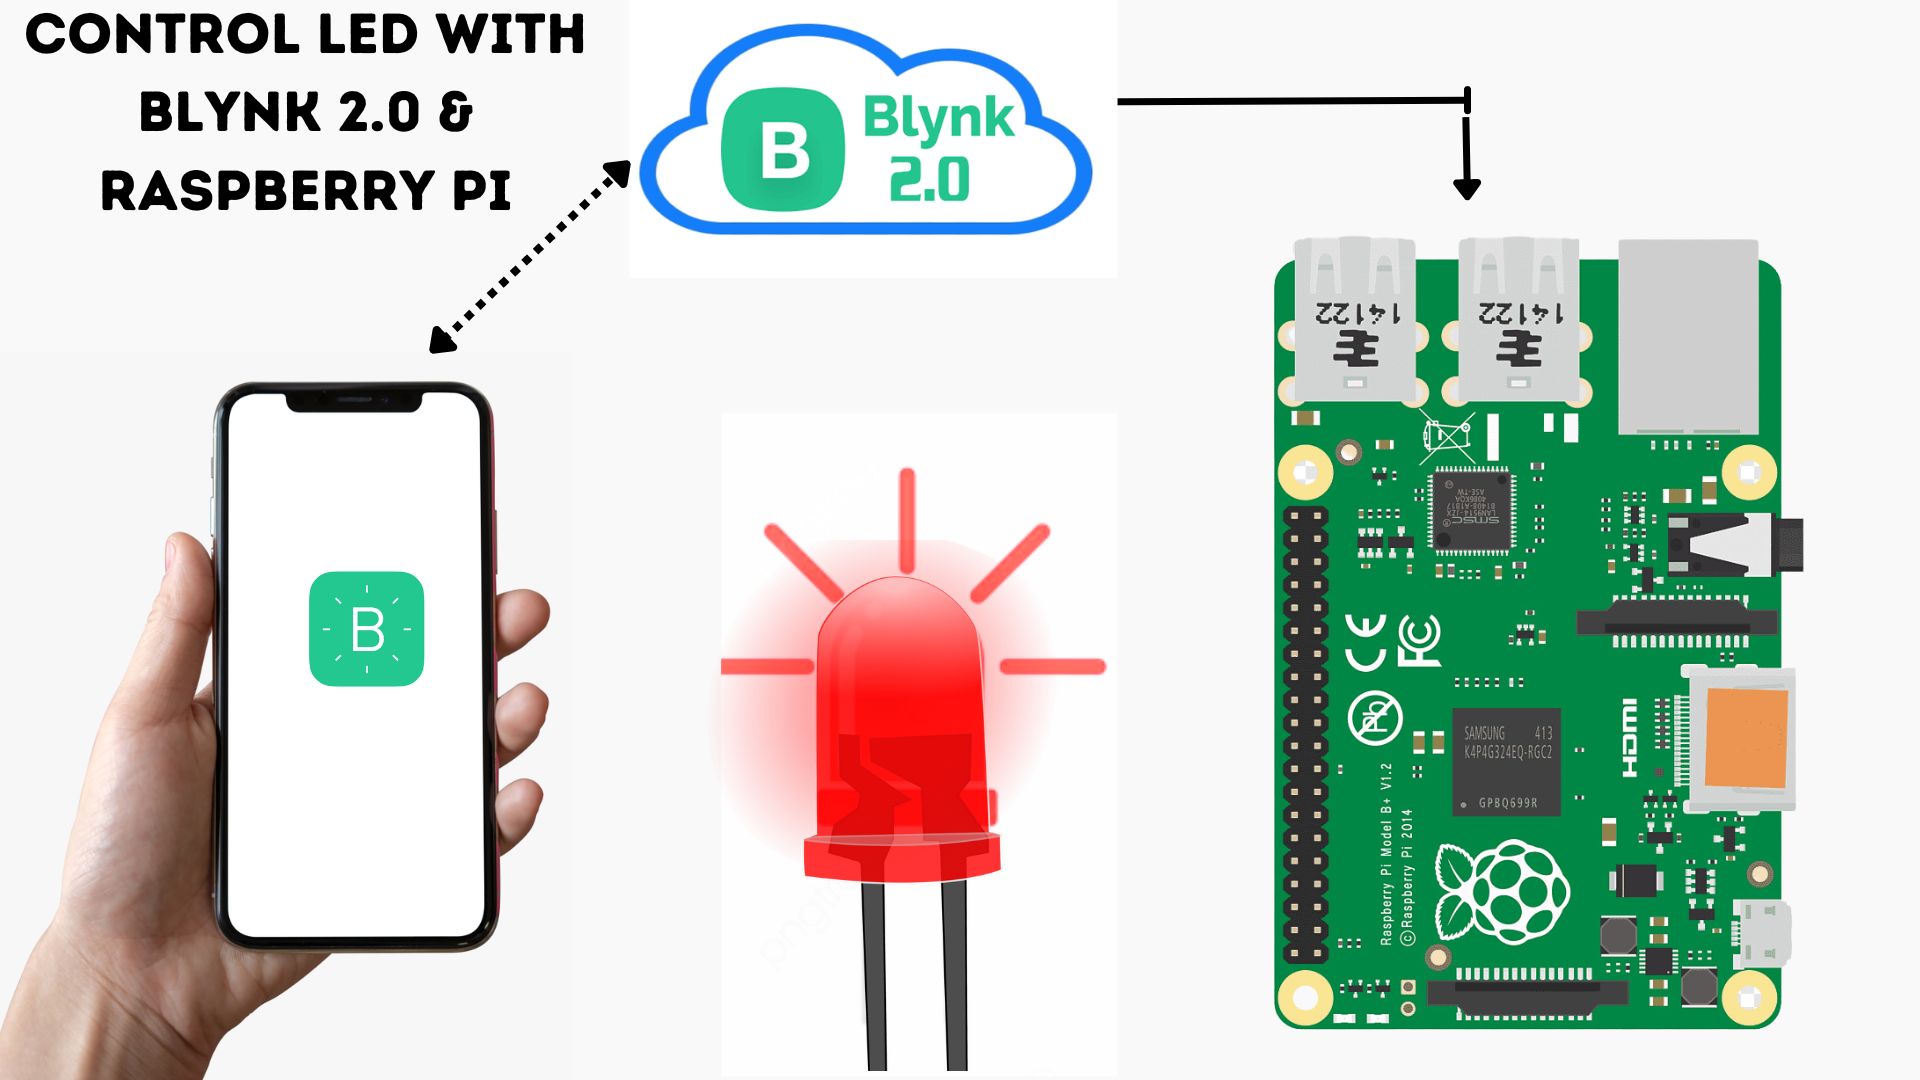 LED Control with Blynk 2.0 Raspberry Pi